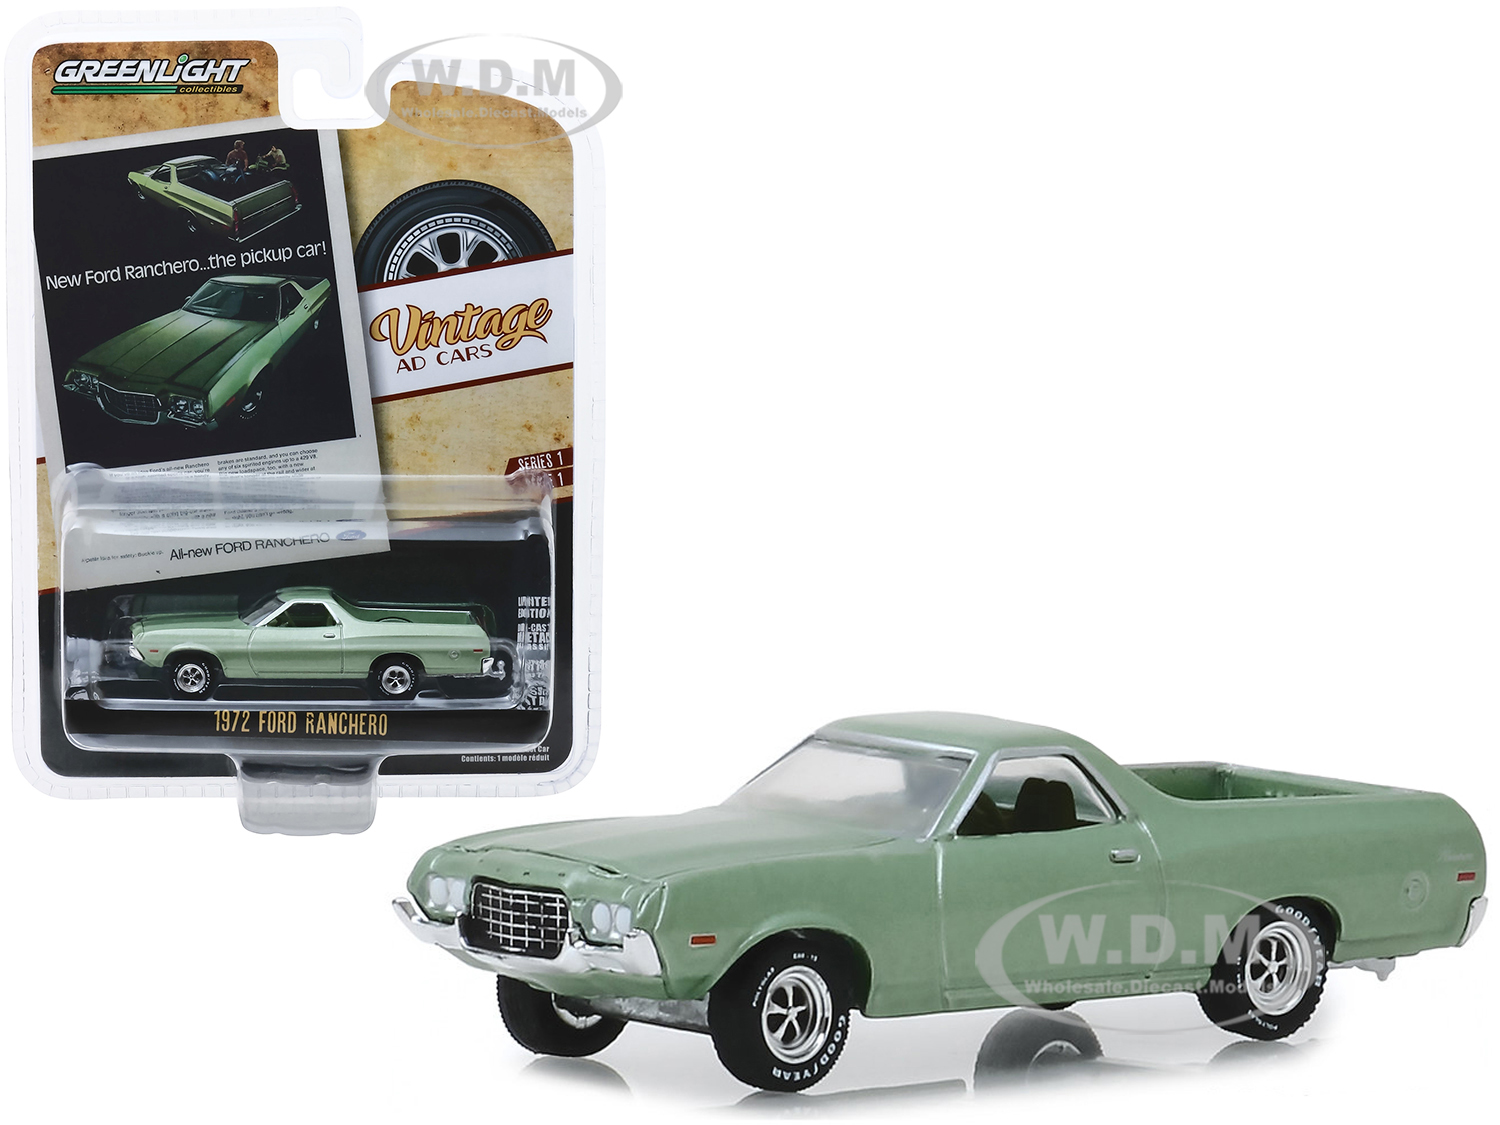 1972 Ford Ranchero Light Green "New Ford RancheroThe Pickup Car" "Vintage Ad Cars" Series 1 1/64 Diecast Model Car by Greenlight